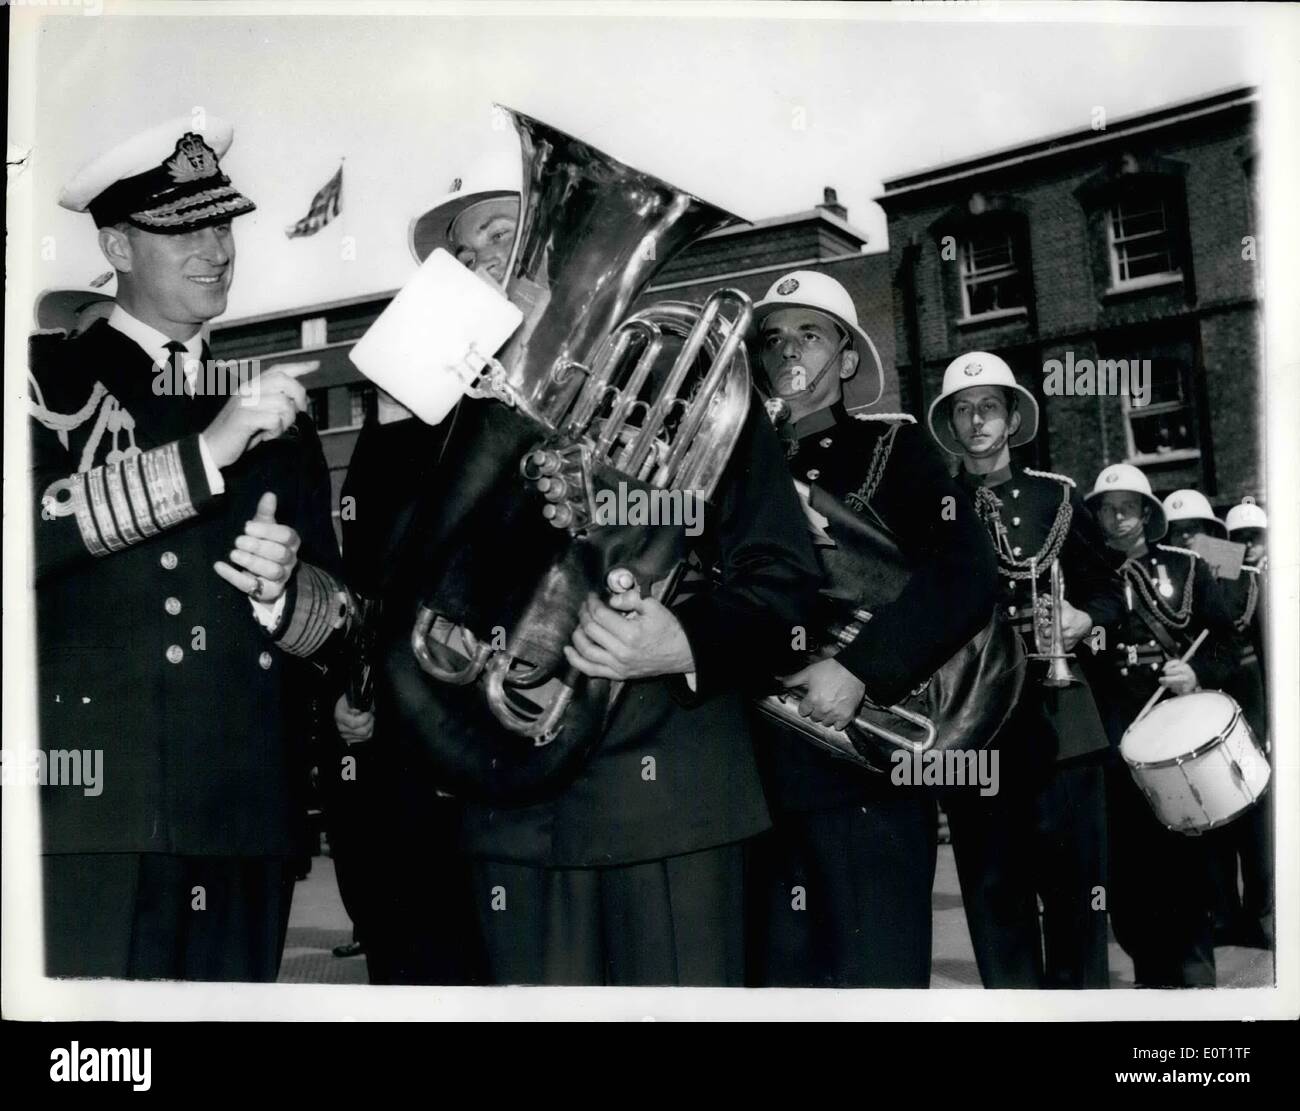 Jul. 07, 1960 - Duke of Edinburgh inspects the London Fire Brigade: H.R.H. The Duke of Edinburgh yesterday paid a visit to the Headquarters of the London Fire Brigade where he saw a demonstration of the latest methods of fire combat etc.. Photo shows The Duke asks Tuba Player G. Whybrow what piece of music he was playing and received the answer ''Old Father Thames'' during the Duke's visit yesterday. Stock Photo